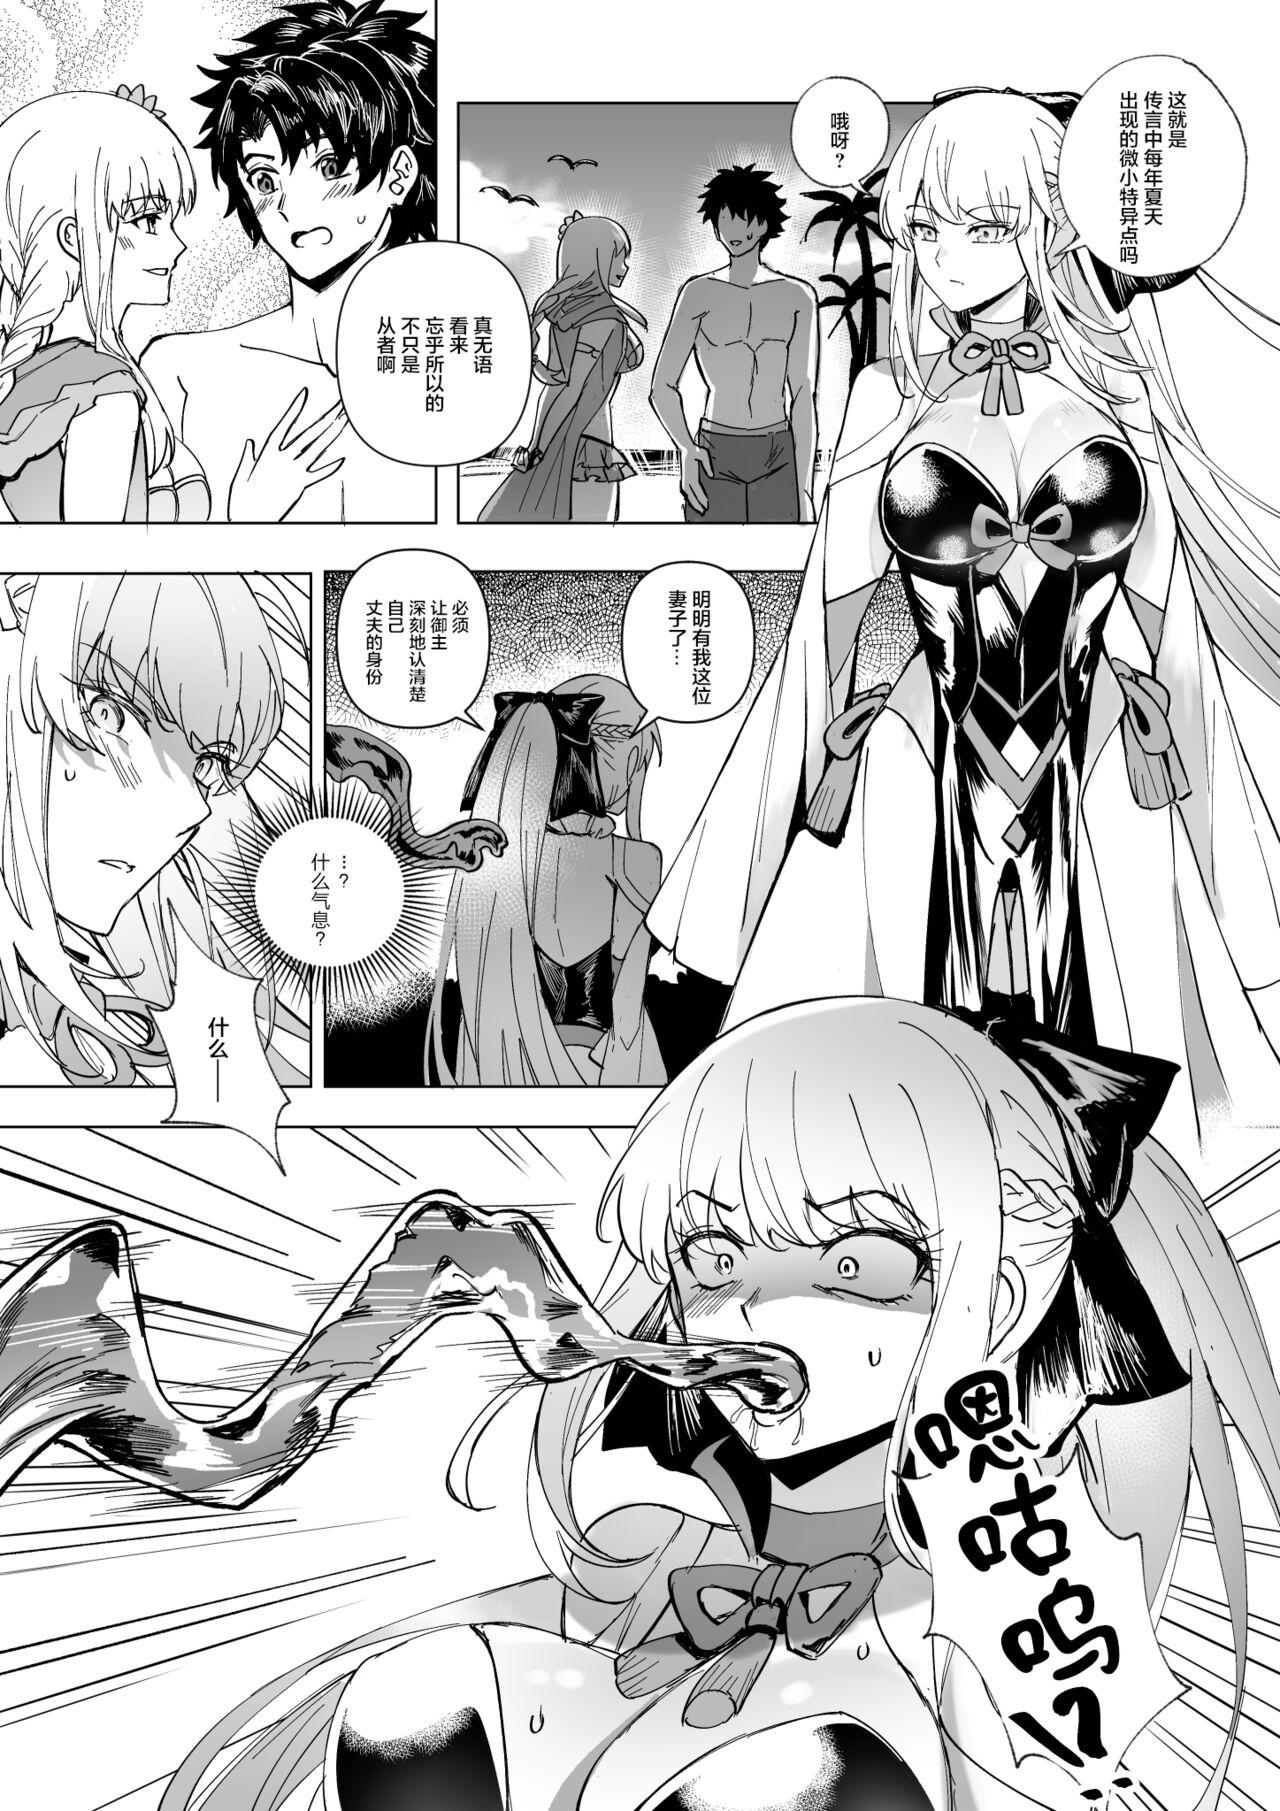 Family Roleplay FGO モルガン&水着カーマ憑依 - Fate grand order Leaked - Page 2